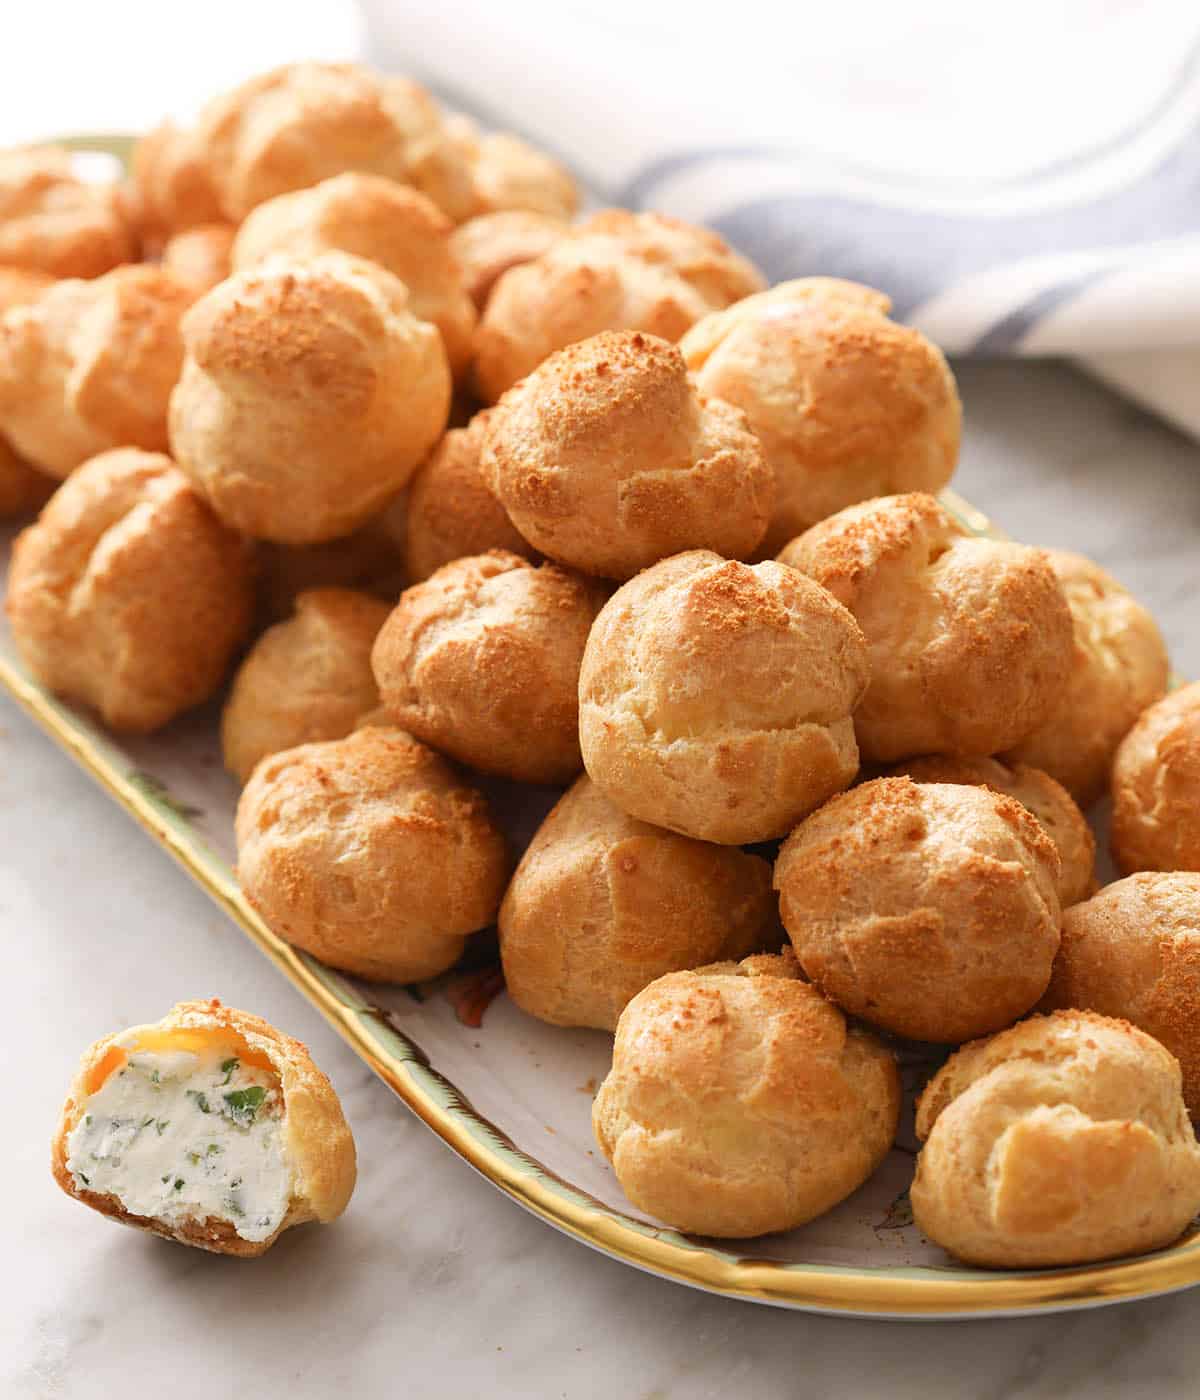 Many cheese puffs on a porcelain tray.